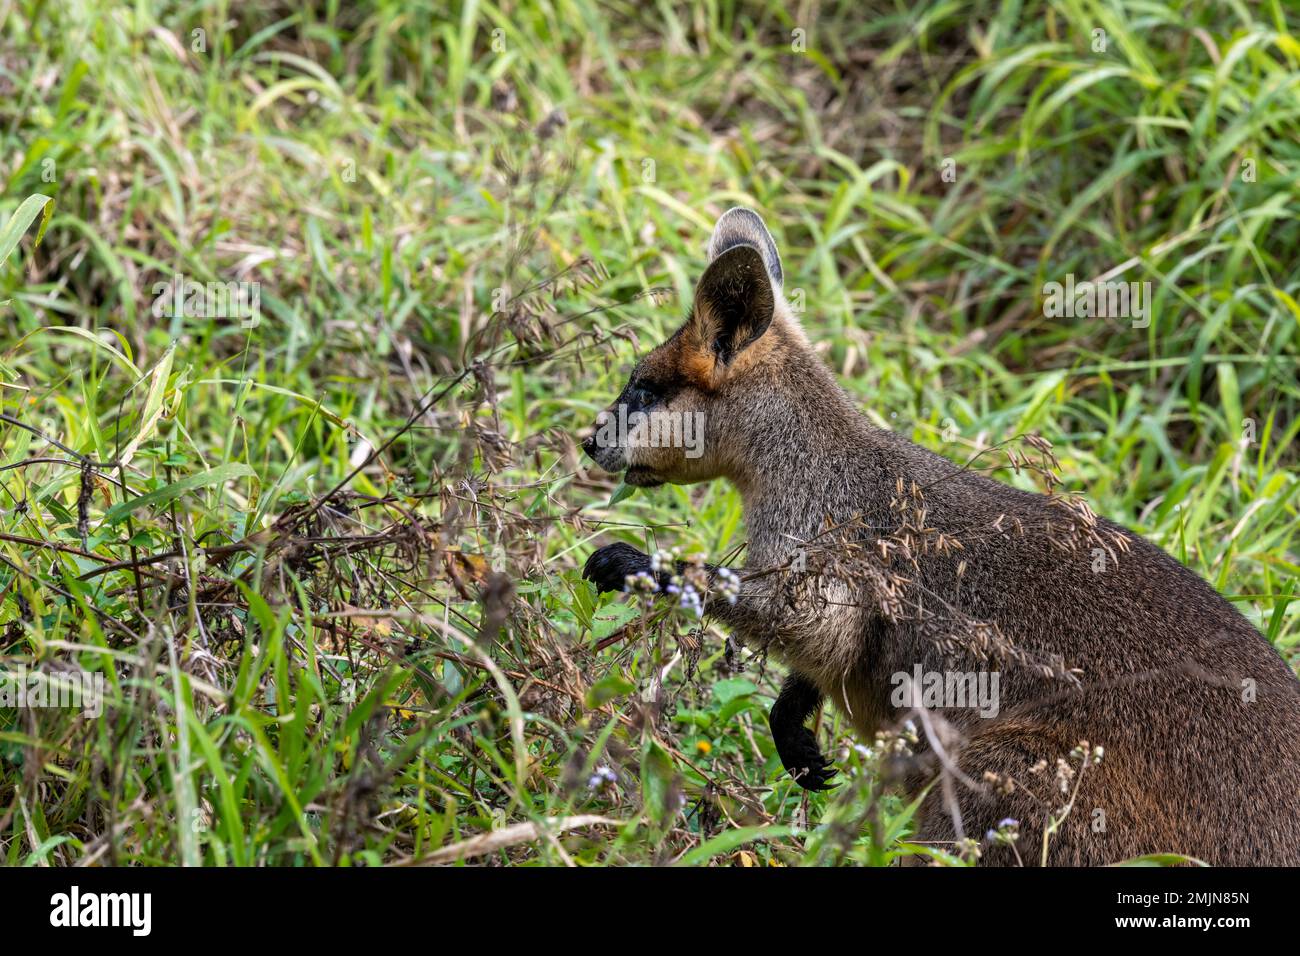 The swamp wallaby (Wallabia bicolor) is a small macropod marsupial of eastern Australia enjoying a feed along a walking track in Carnarvon Gorge. Stock Photo